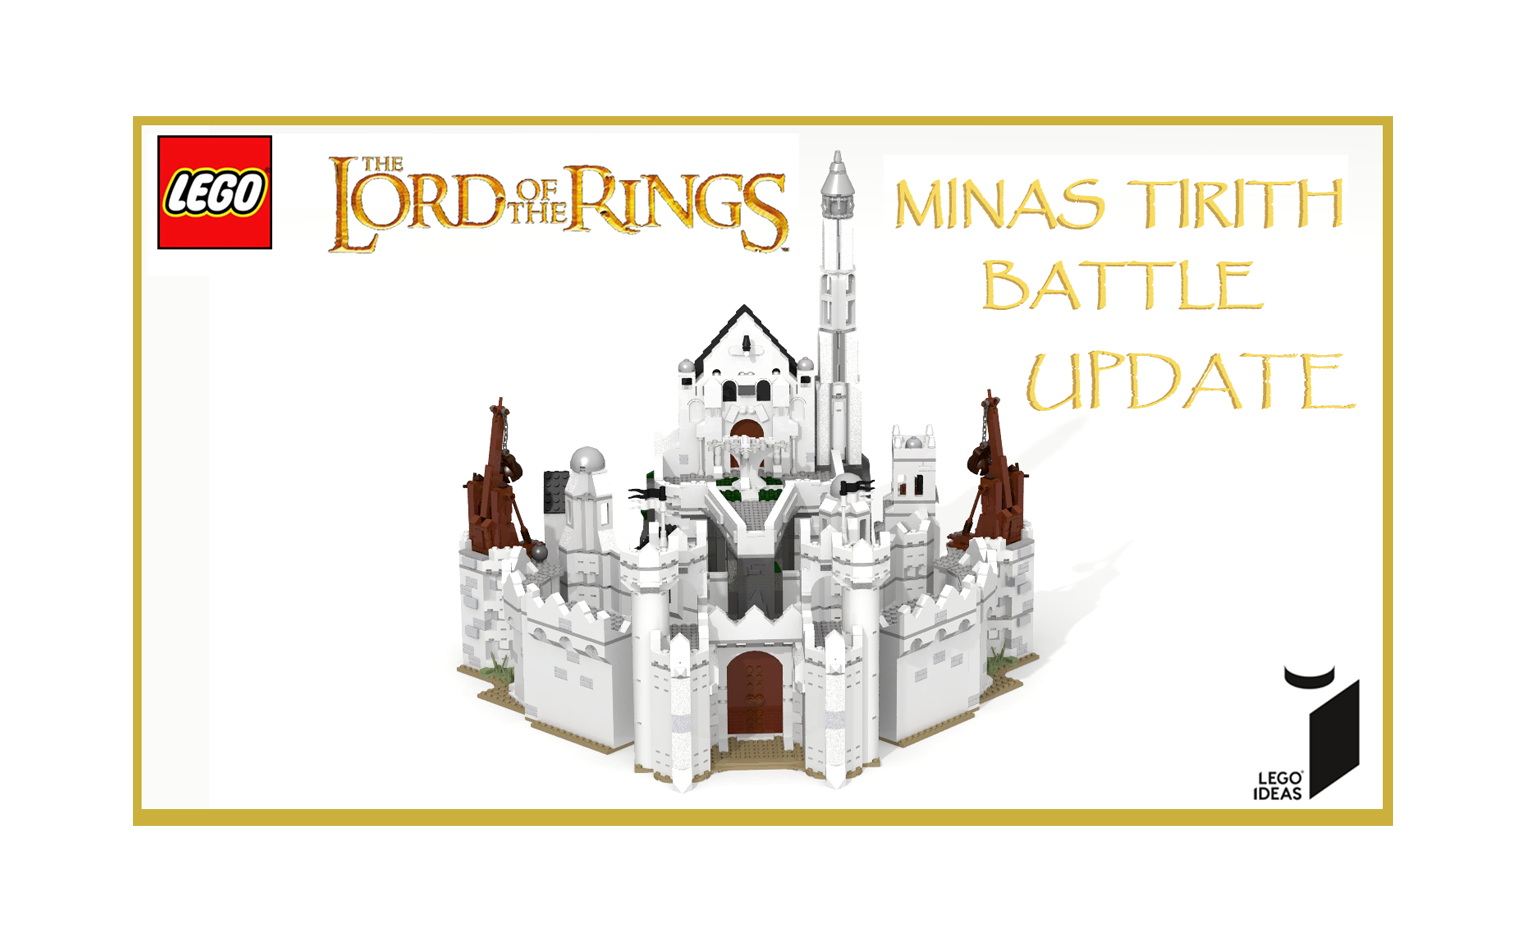 LEGO IDEAS - Lord of the Rings Minas Tirith